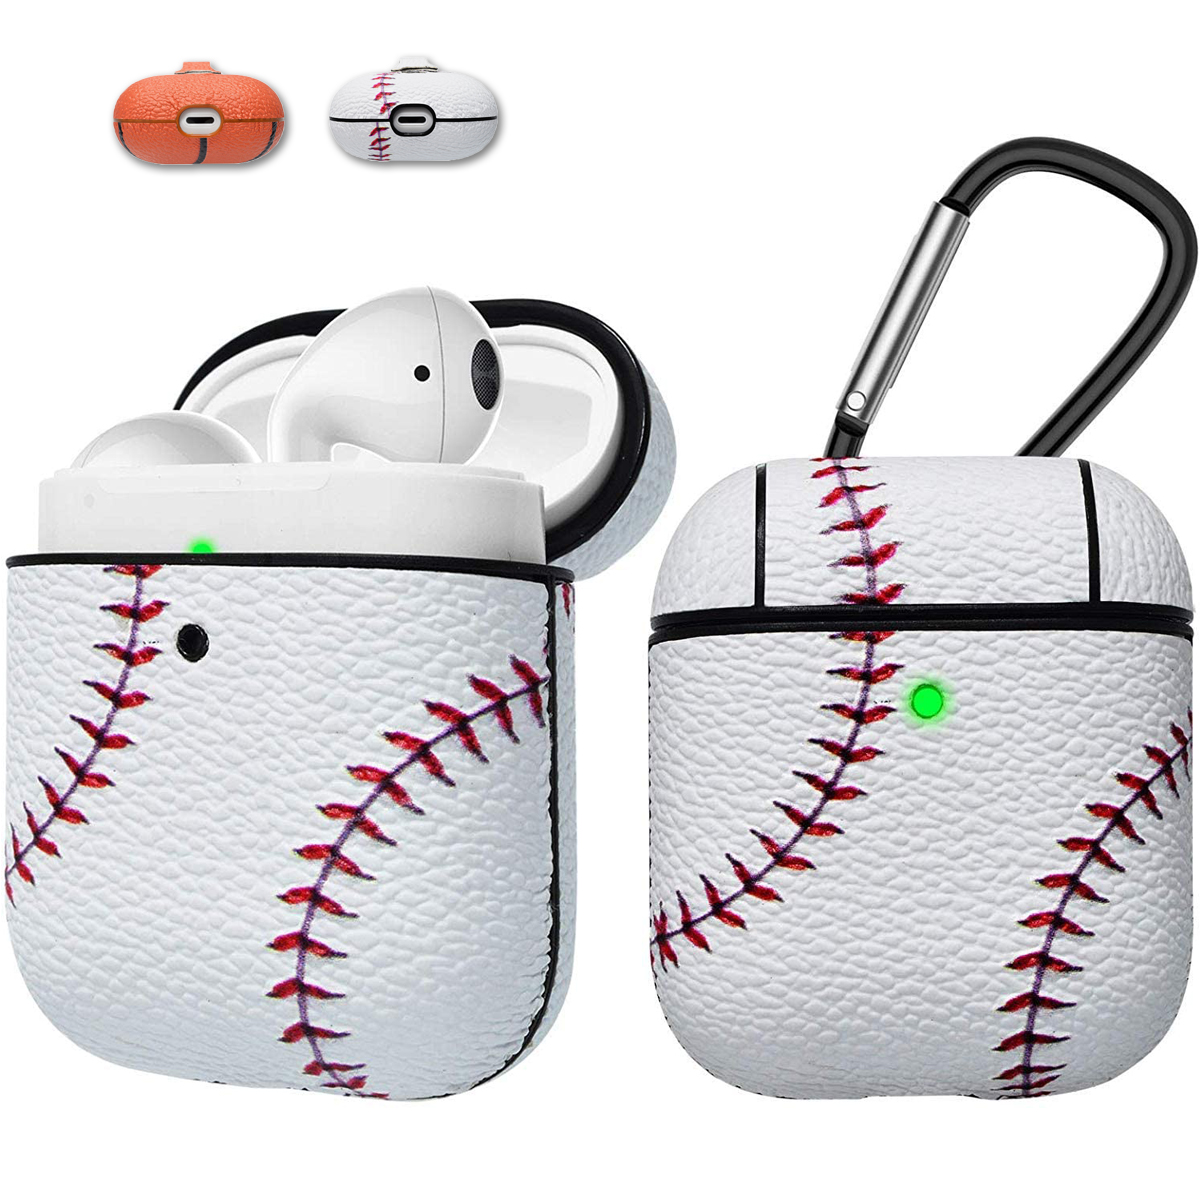 Apple Airpods Case Skin, Takfox AirPods Accessories Case for Airpods 1 & 2 Portable Protective Anti-Scratch PU Leather Cover Skin for Airpods 1 & AirPods 2 [Front LED Visible] w/ Keychain - Baseball - image 1 of 9